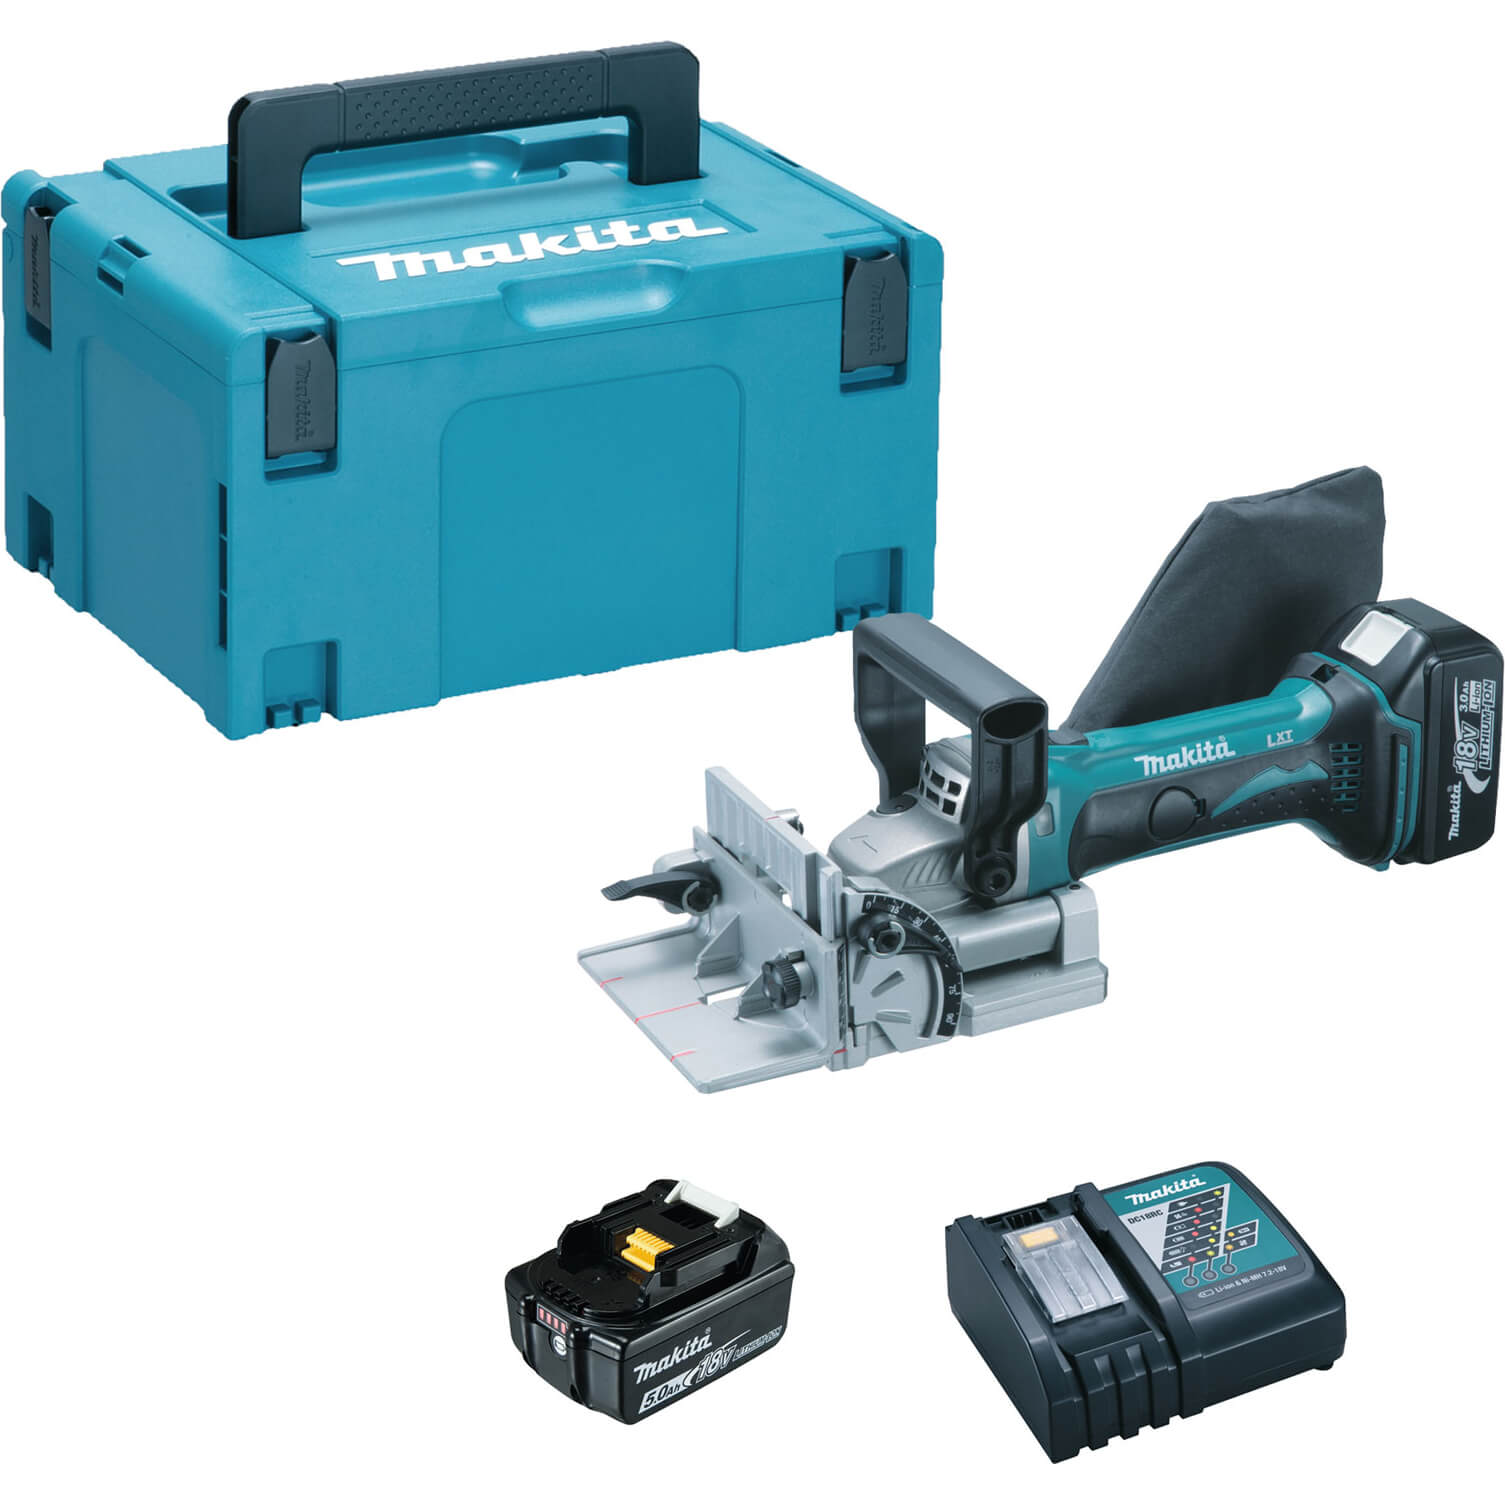 Image of Makita DPJ180 18v LXT Cordless Biscuit Jointer 2 x 5ah Li-ion Charger Case